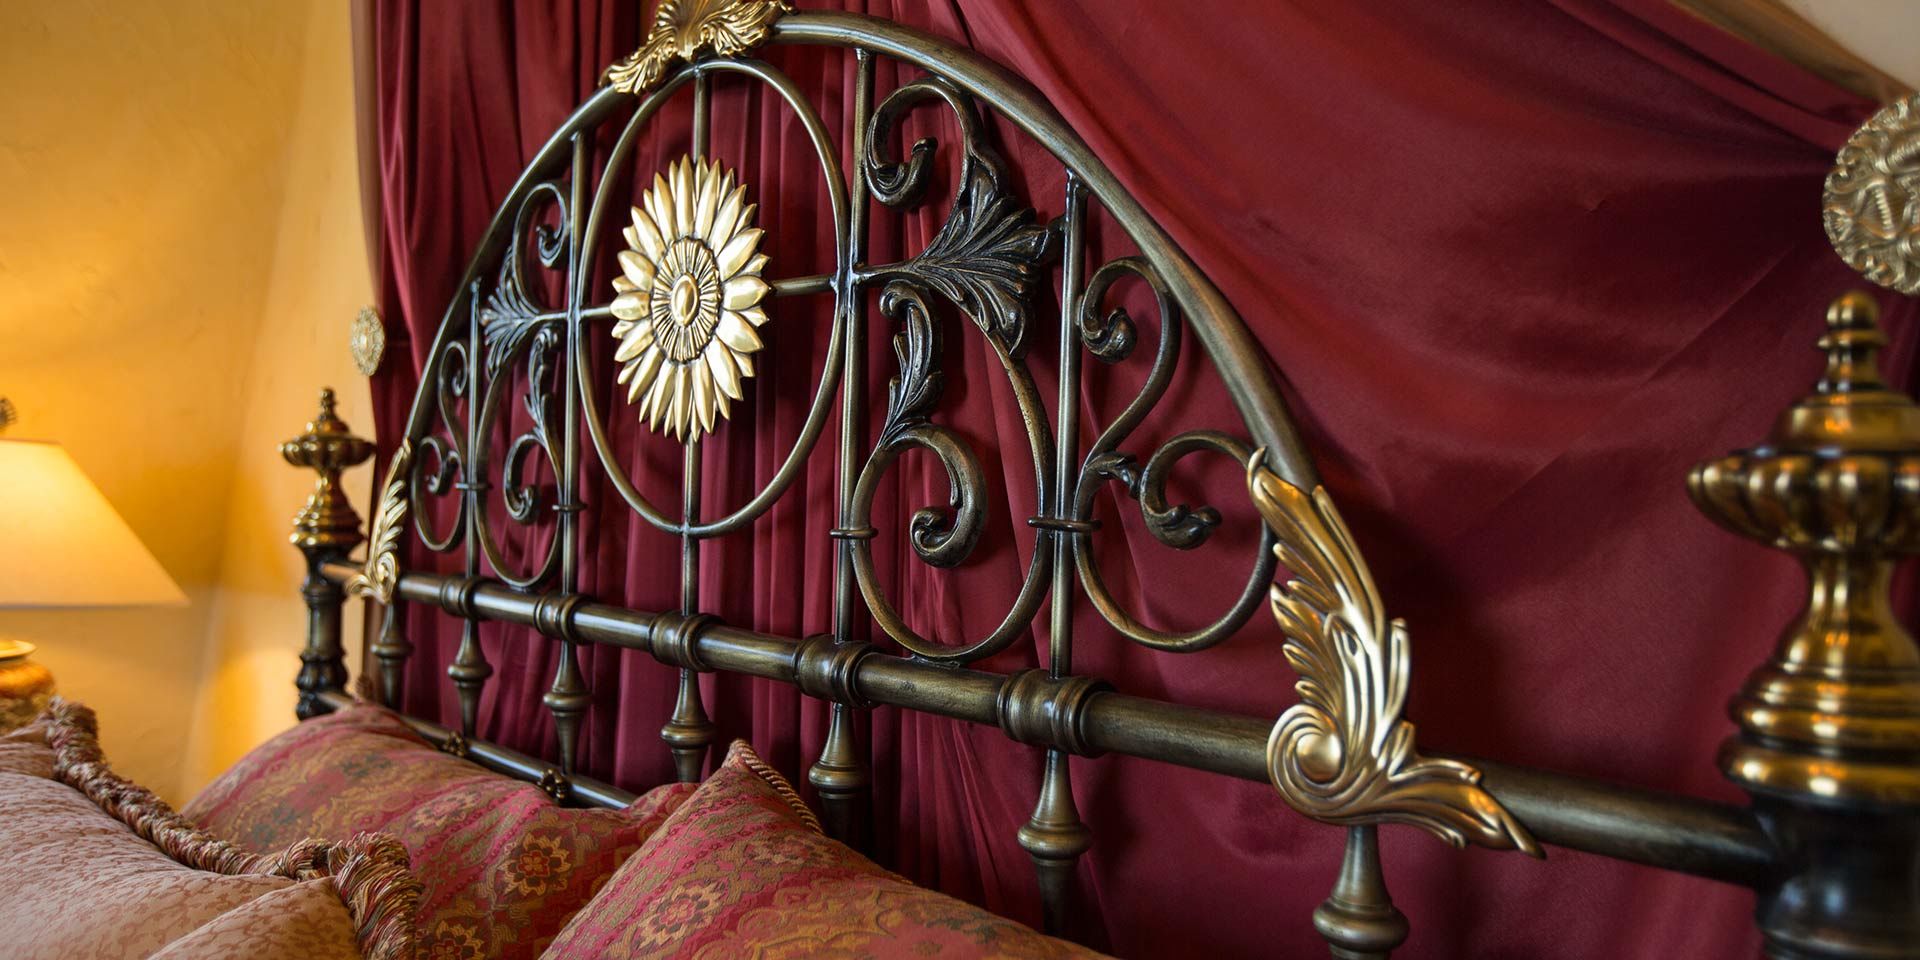 The California king-sized iron bed inside the Mediterranean Guest Room